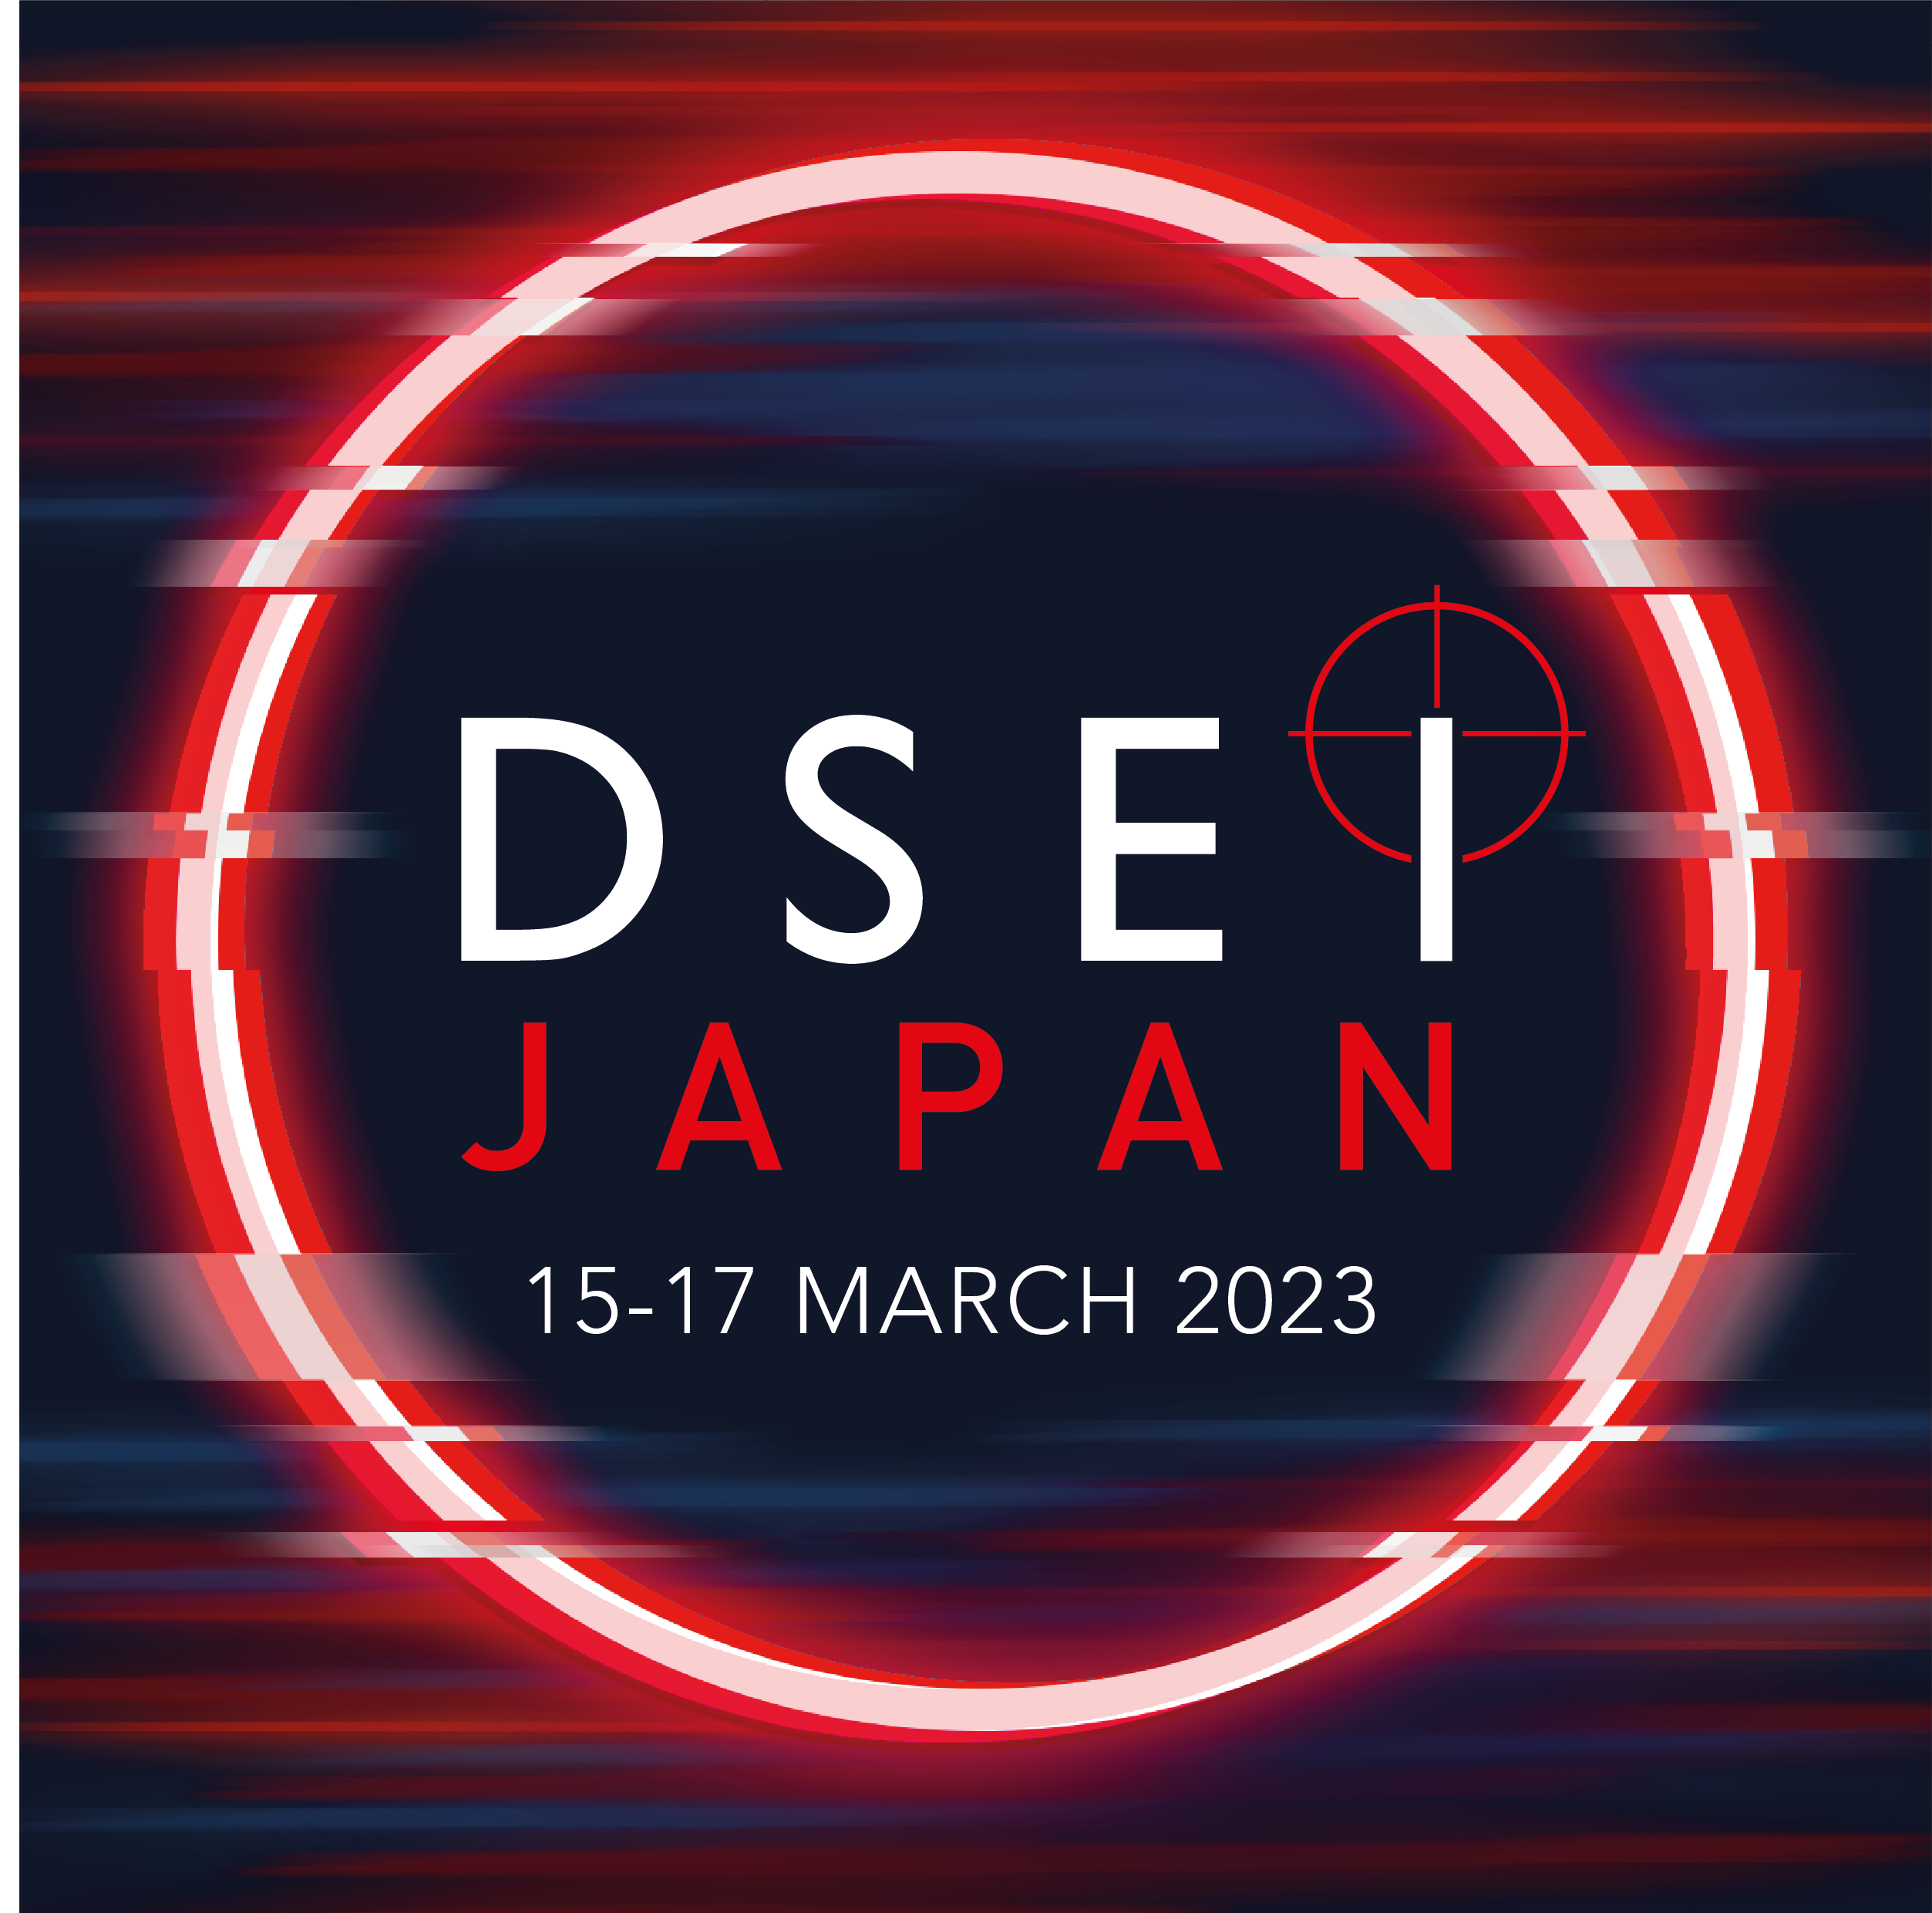 New 2023 Dates for DSEI Japan